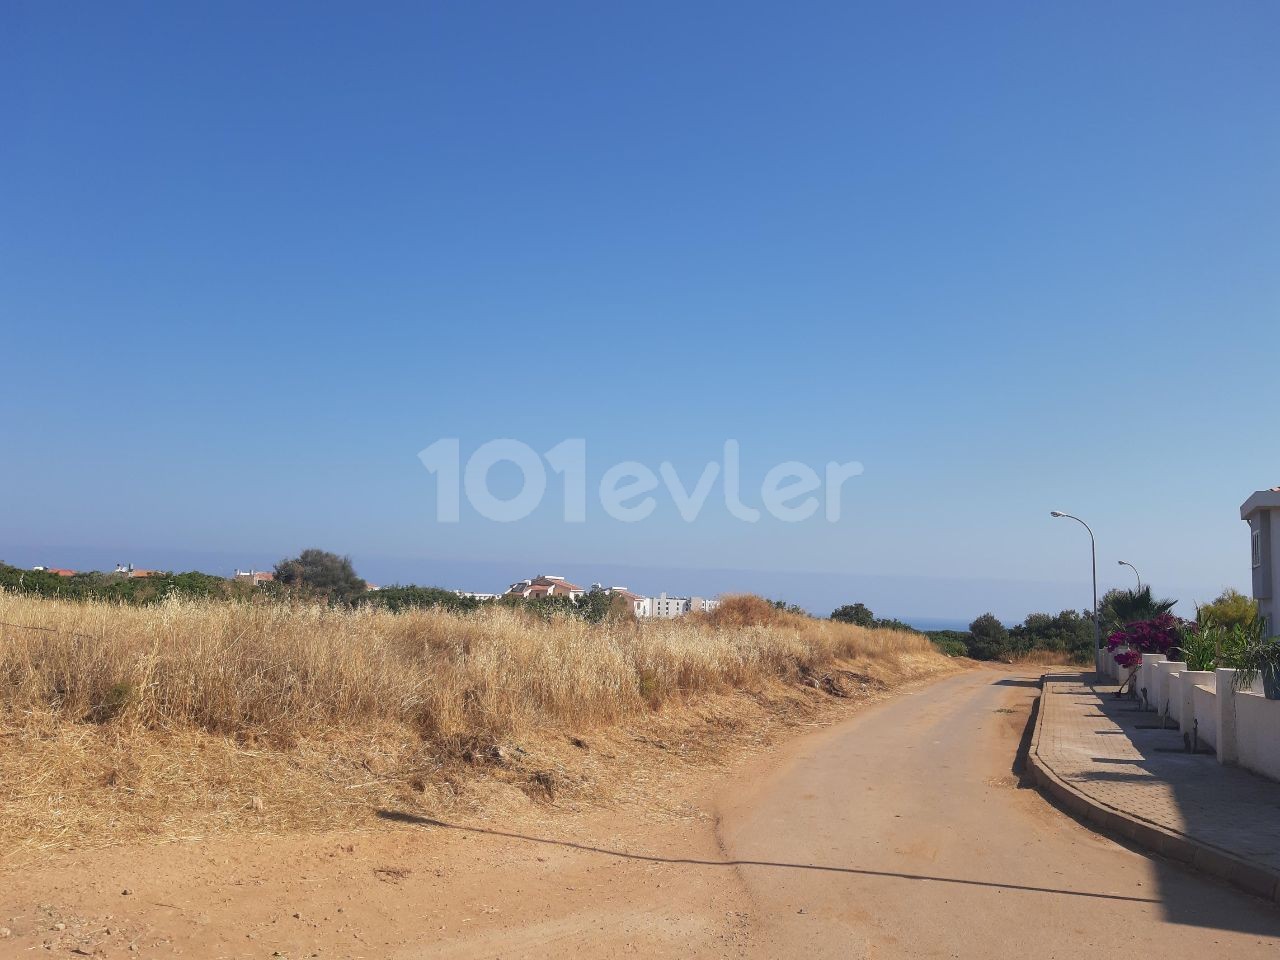 IN ÇATALKÖY, IN THE ELEXUS HOTEL AREA, CLOSE TO THE HOTEL AND THE SEA, IN A VERY GOOD LOCATION, WITH MOUNTAIN, SEA AND NATURE VIEWS, 6 ACRES 3 EVLEK SIZED, ZONED FIELD ** 